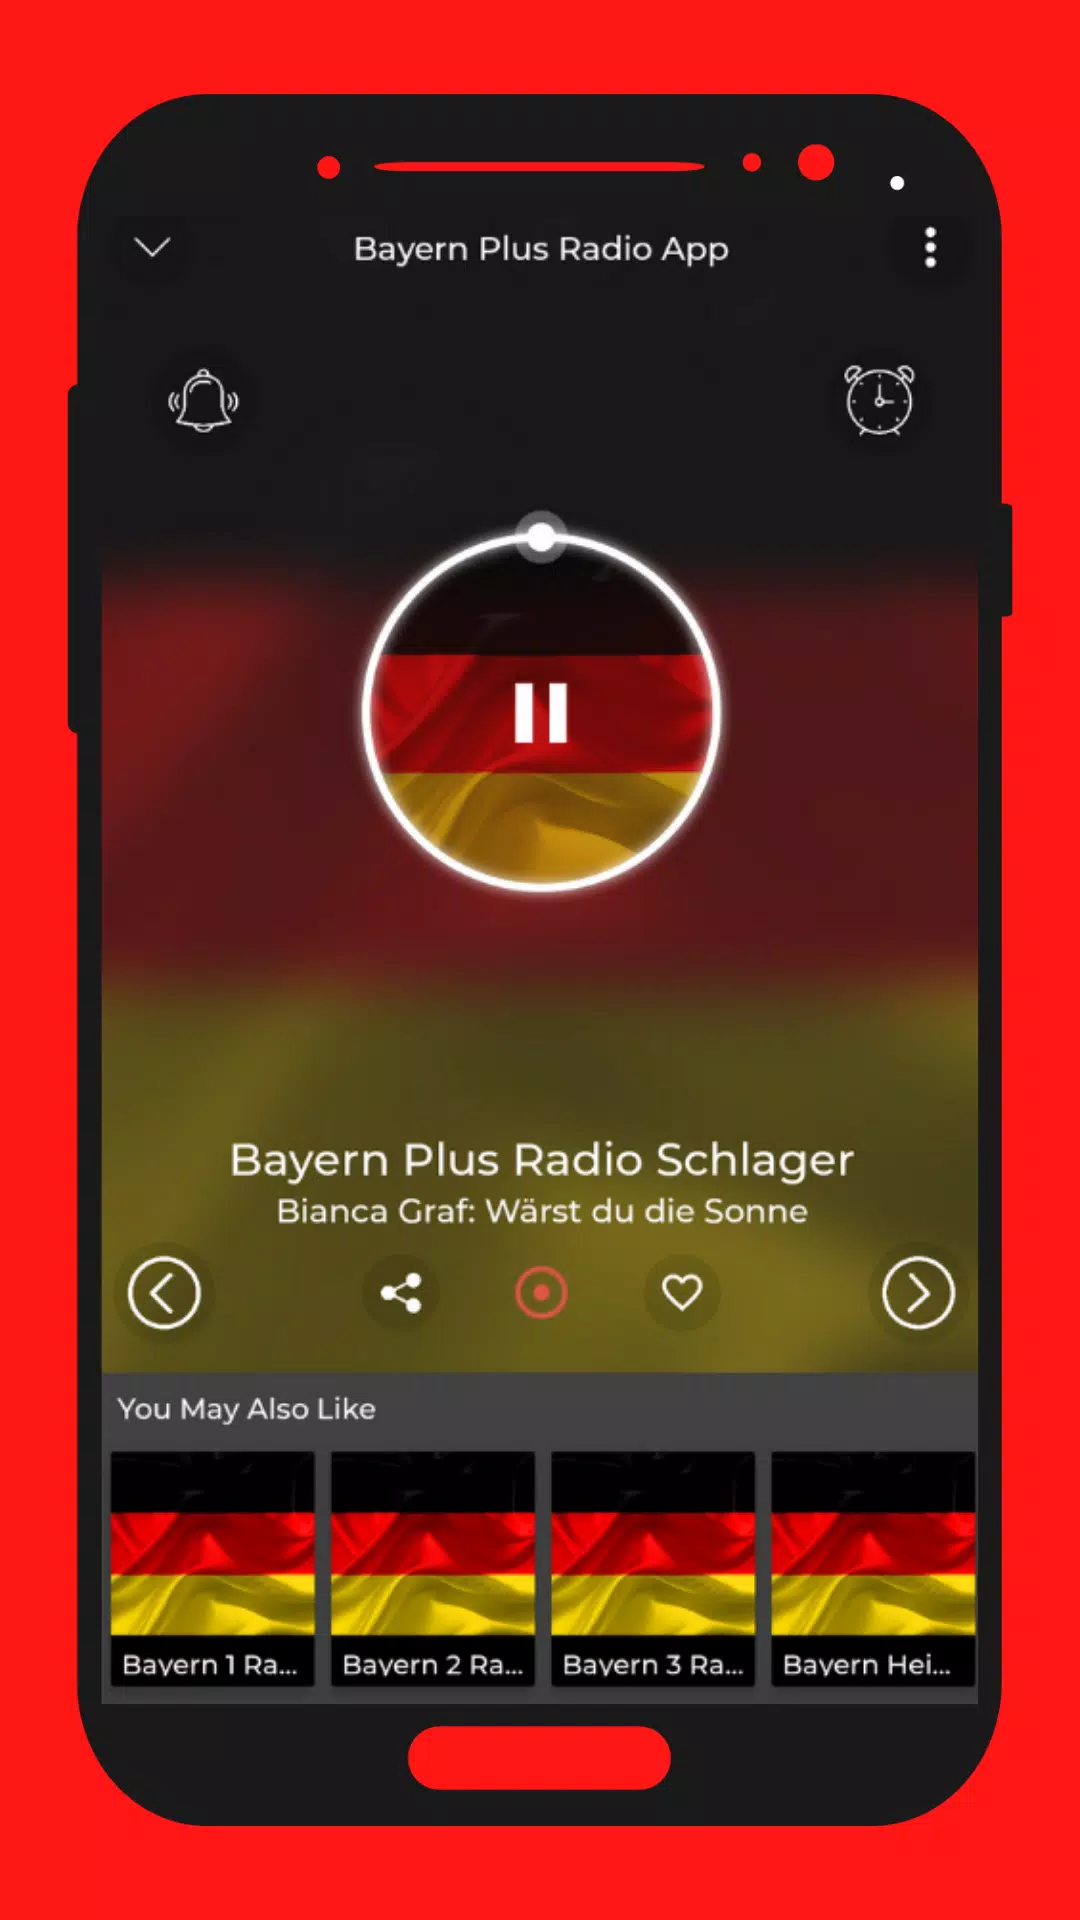 Bayern Plus Radio App for Android - APK Download